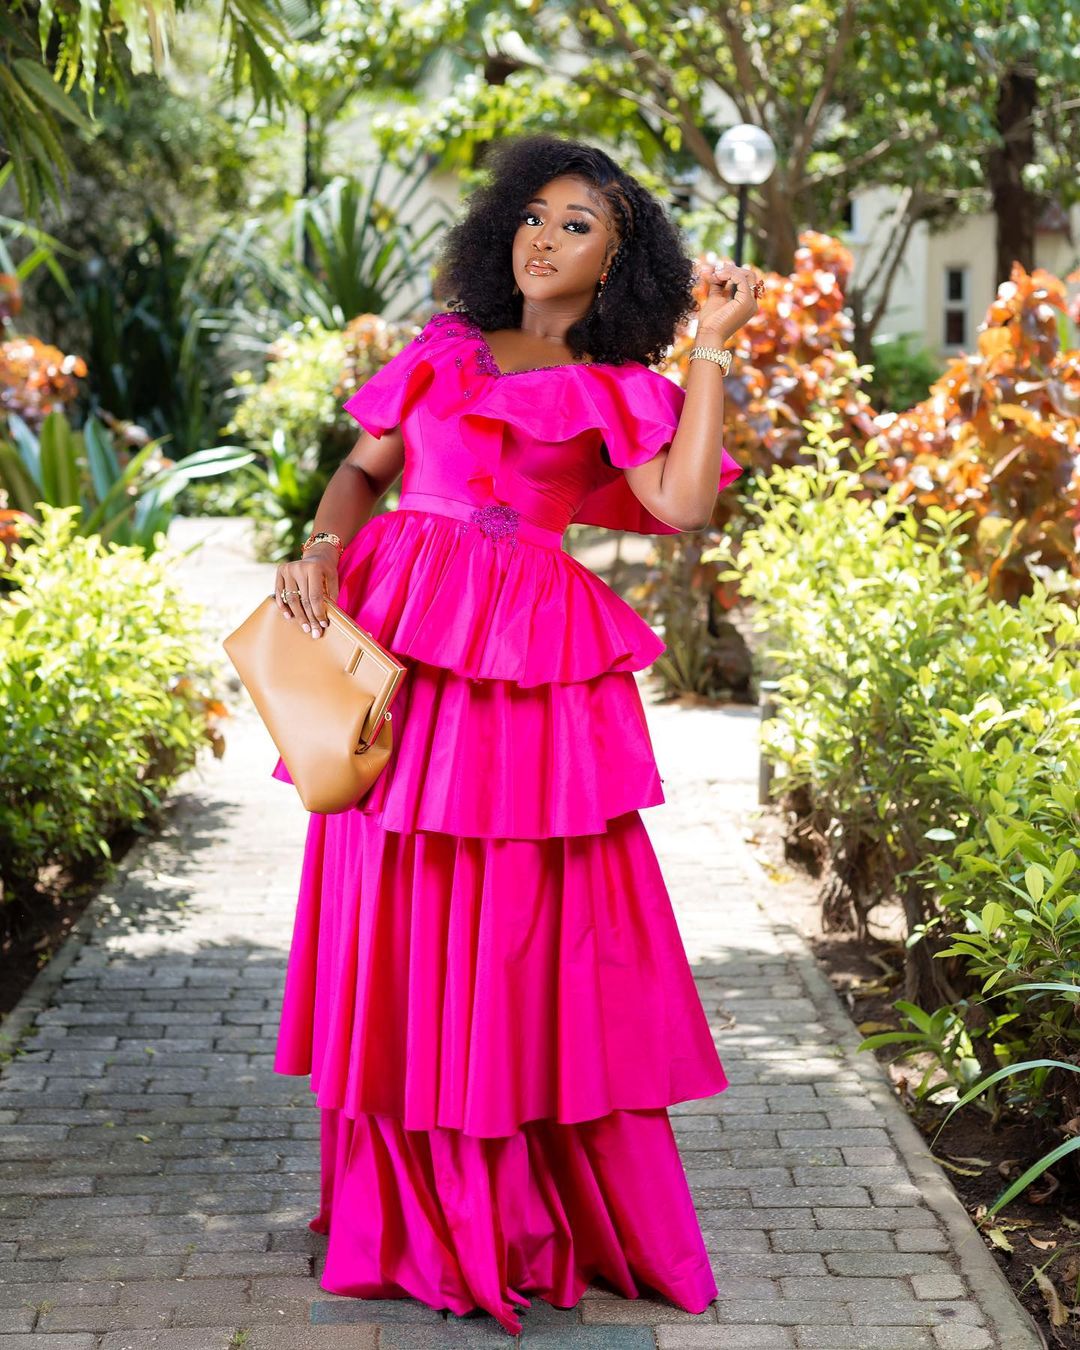  Ini Edo- Keeping It Colorful For The Weekend